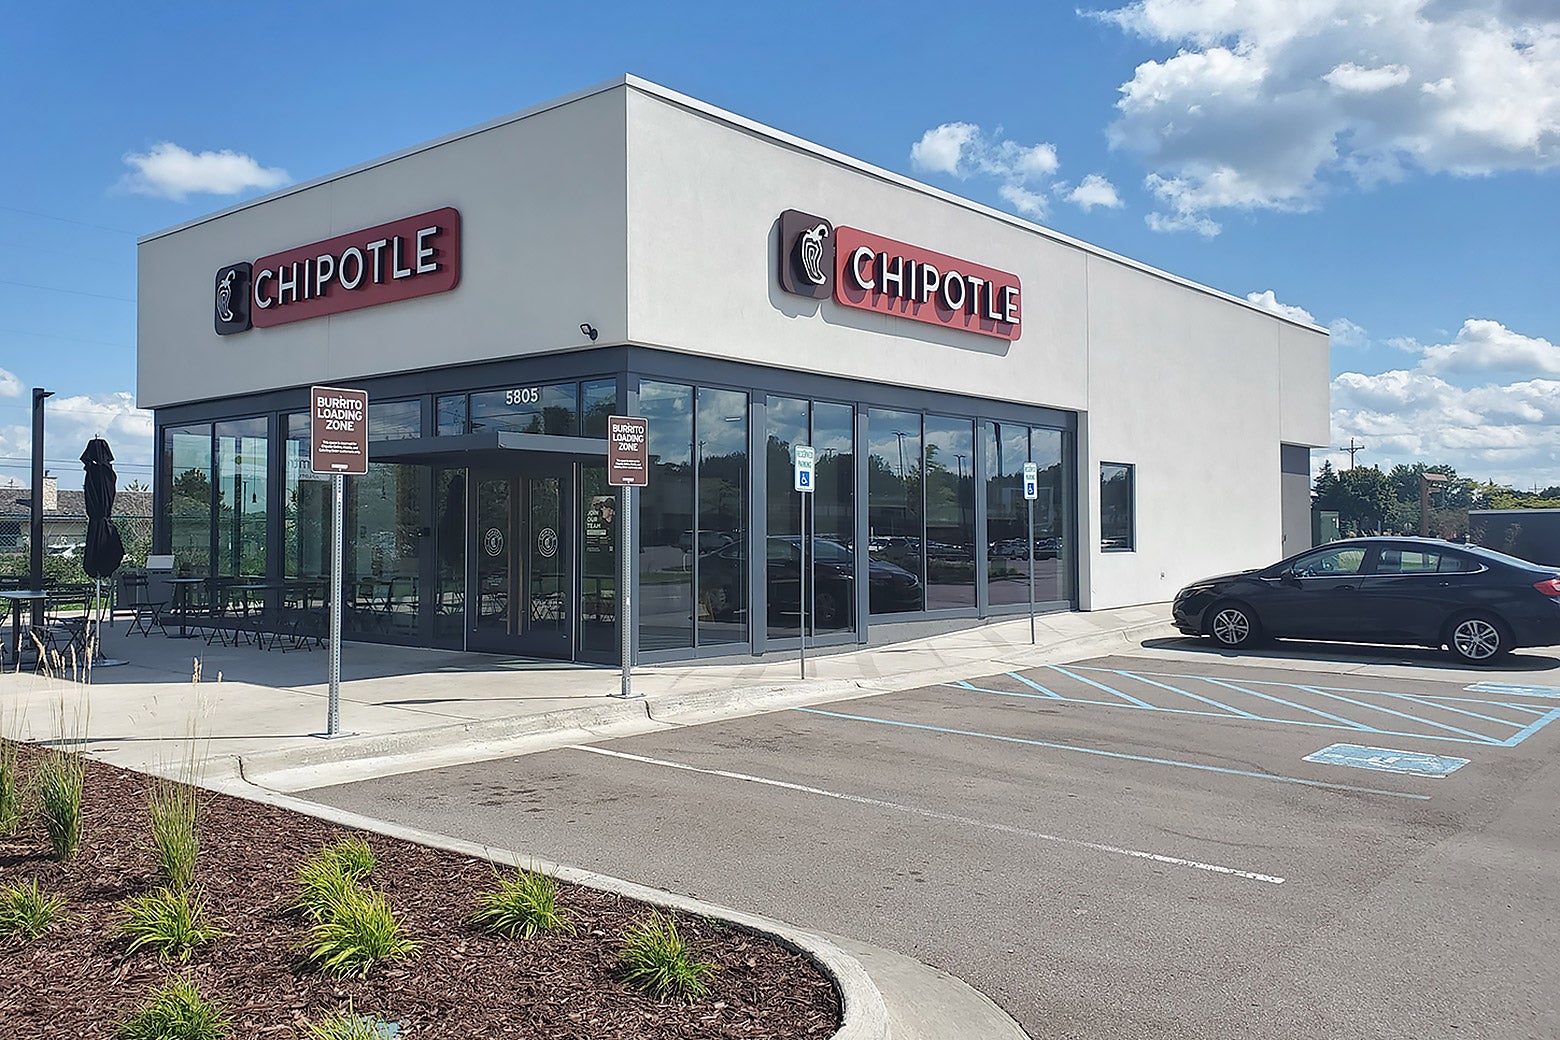 A parking lot and a modern-looking building with large glass windows in the front that says CHIPOTLE on two sides.